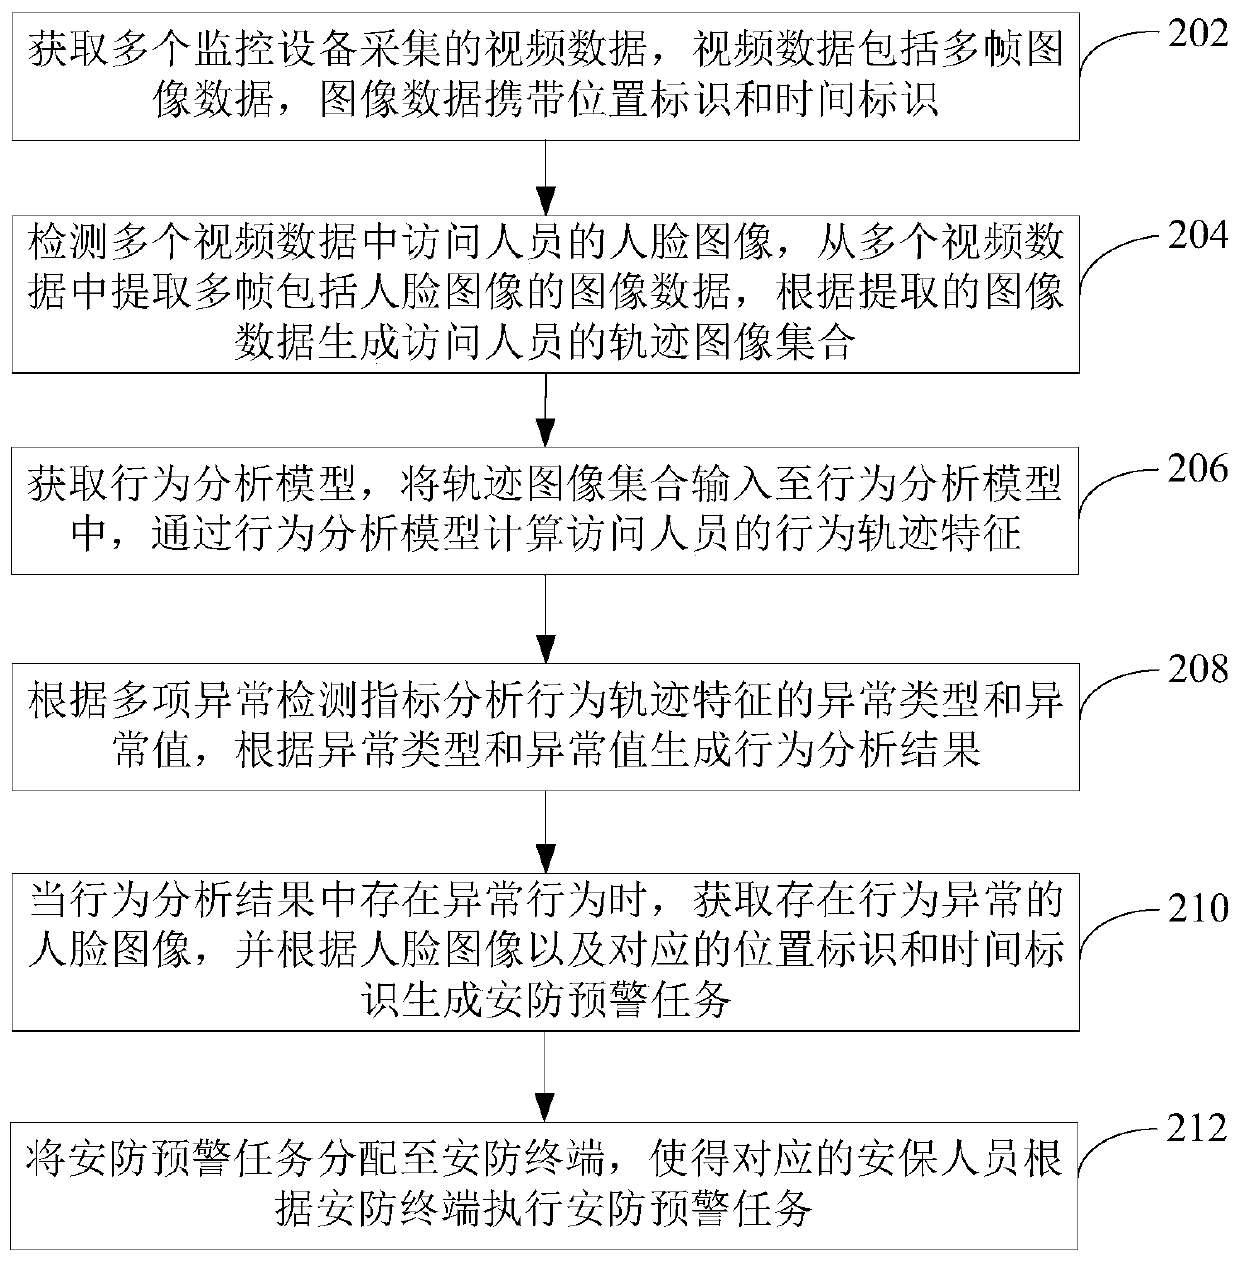 Abnormal behavior monitoring processing method and device, computer device and storage medium